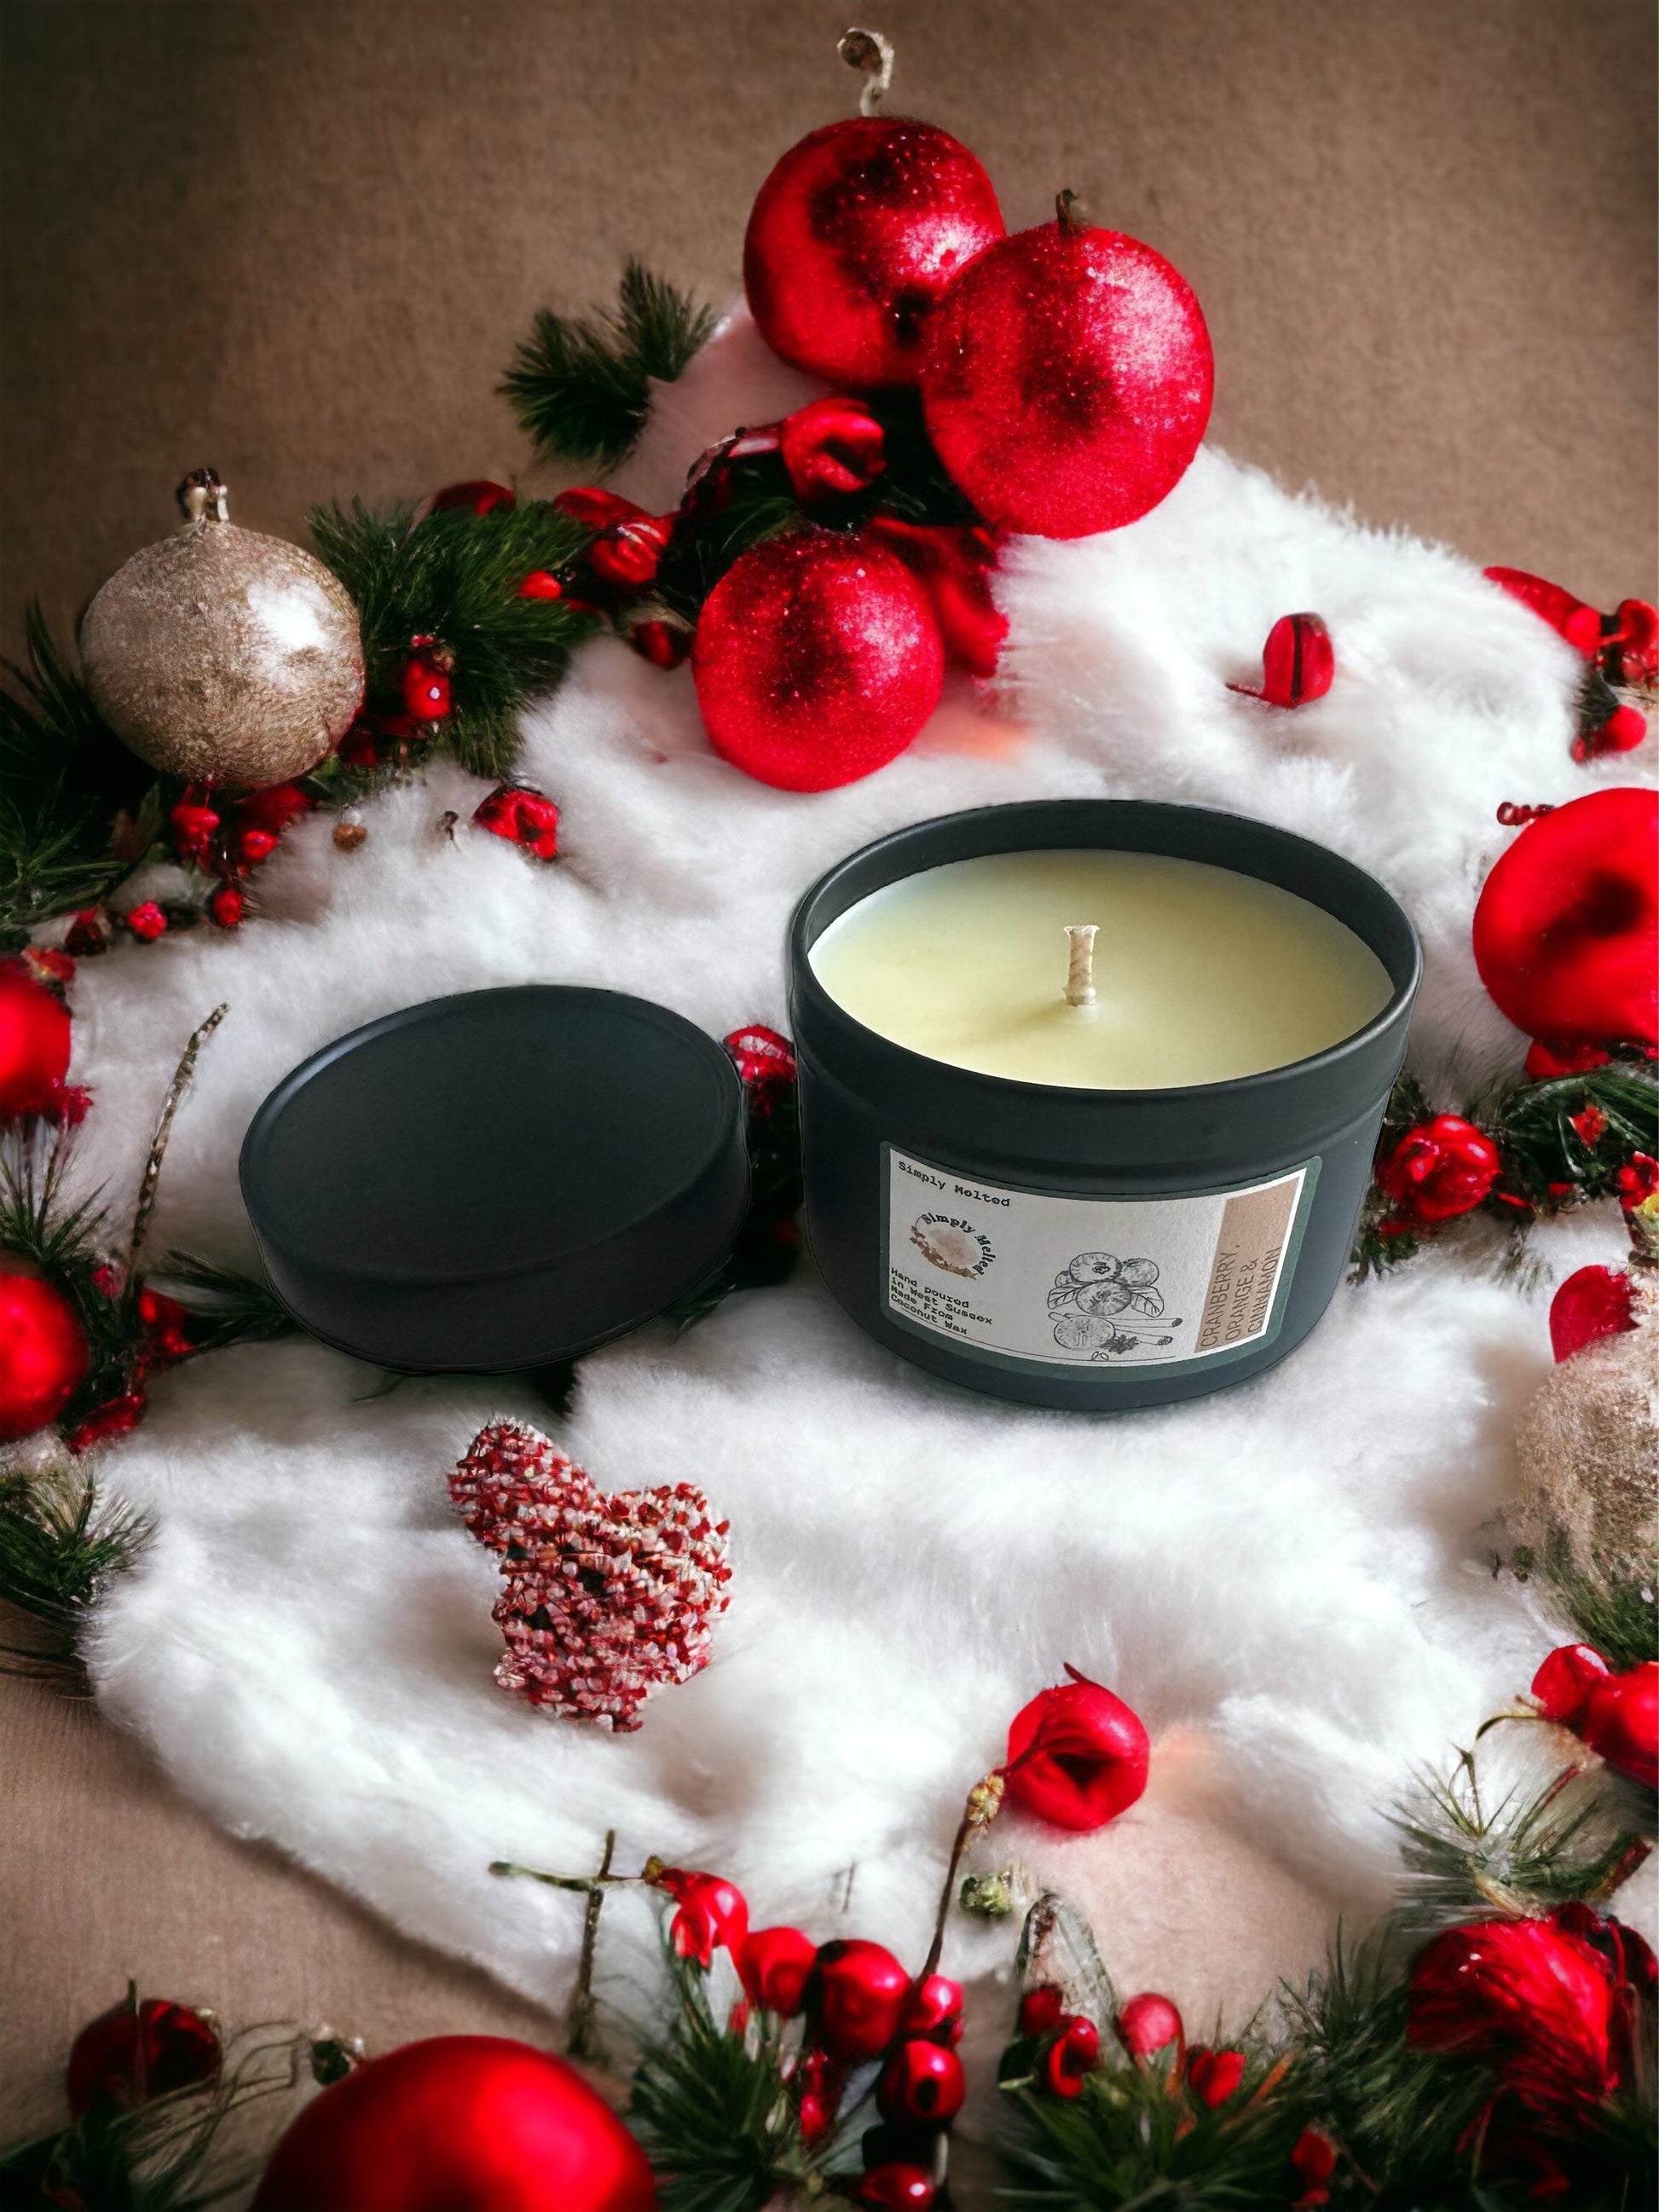 Cranberry, Orange & Cinnamon Candle in a Tin - Simply Melted